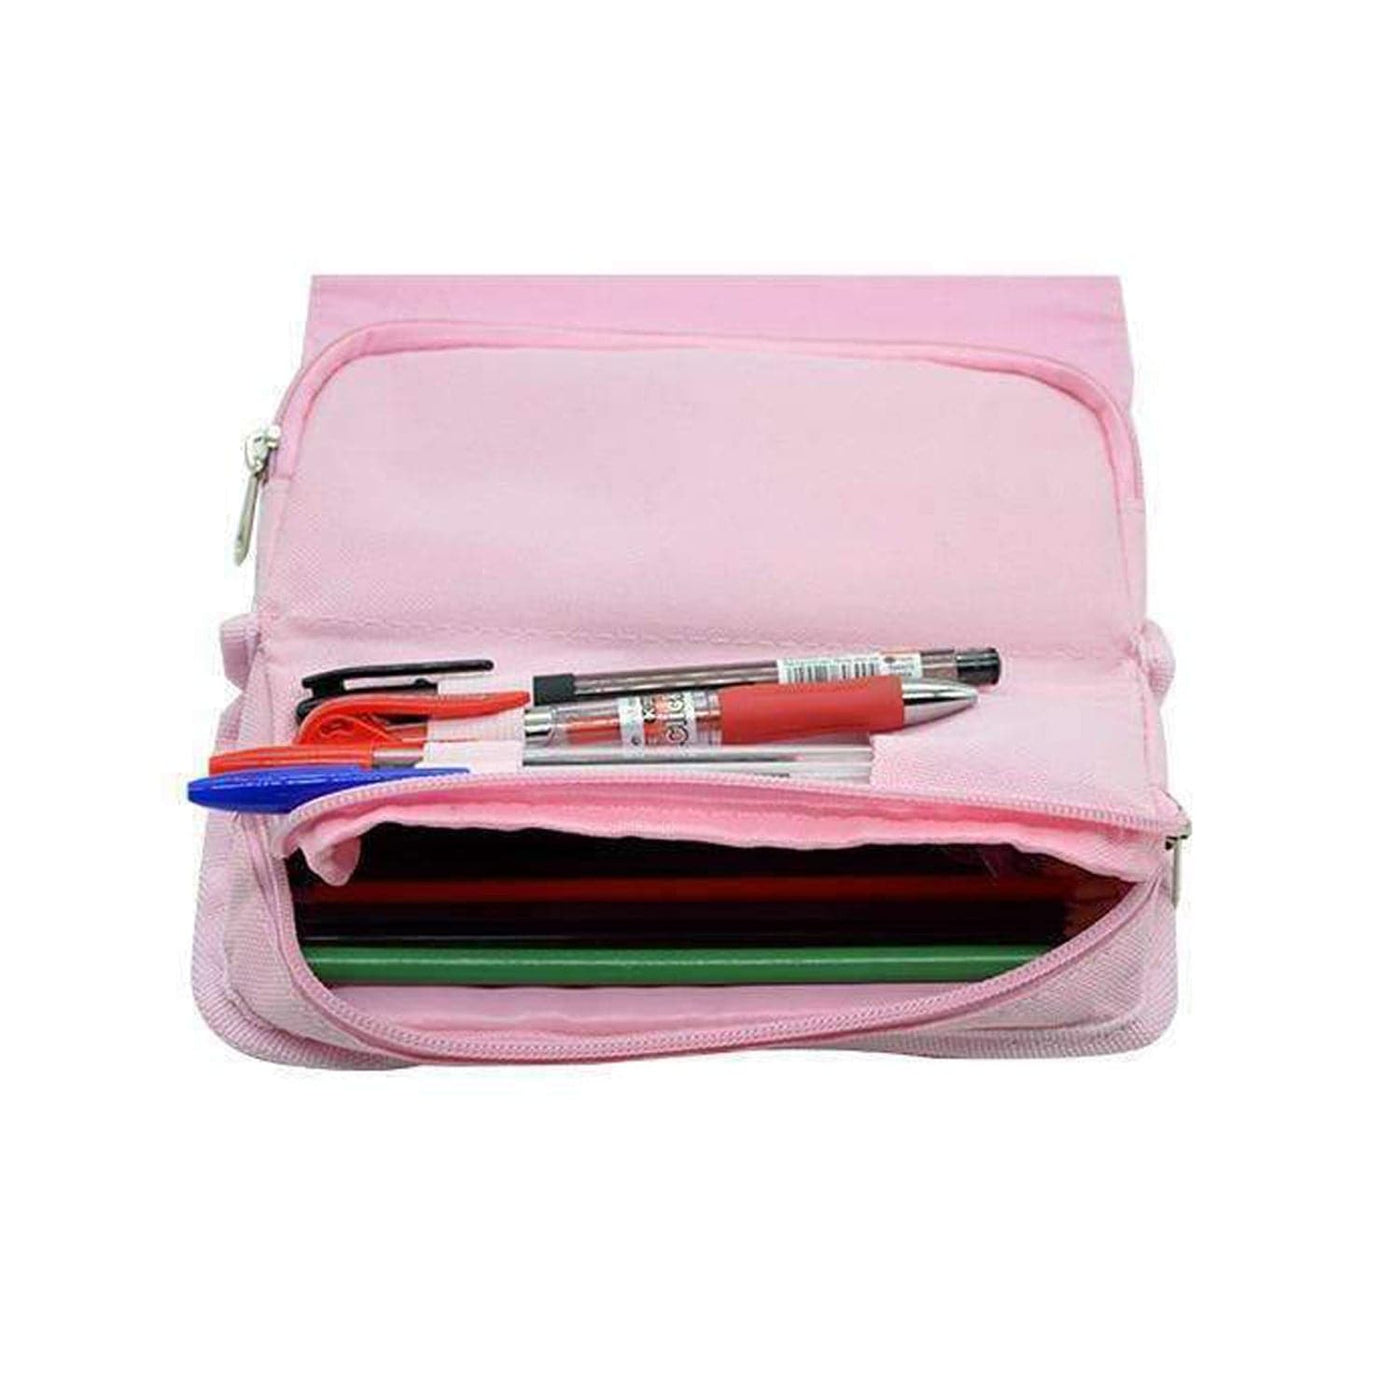 There's Room For Everyone On The Nice List - Christmas Pencil Case